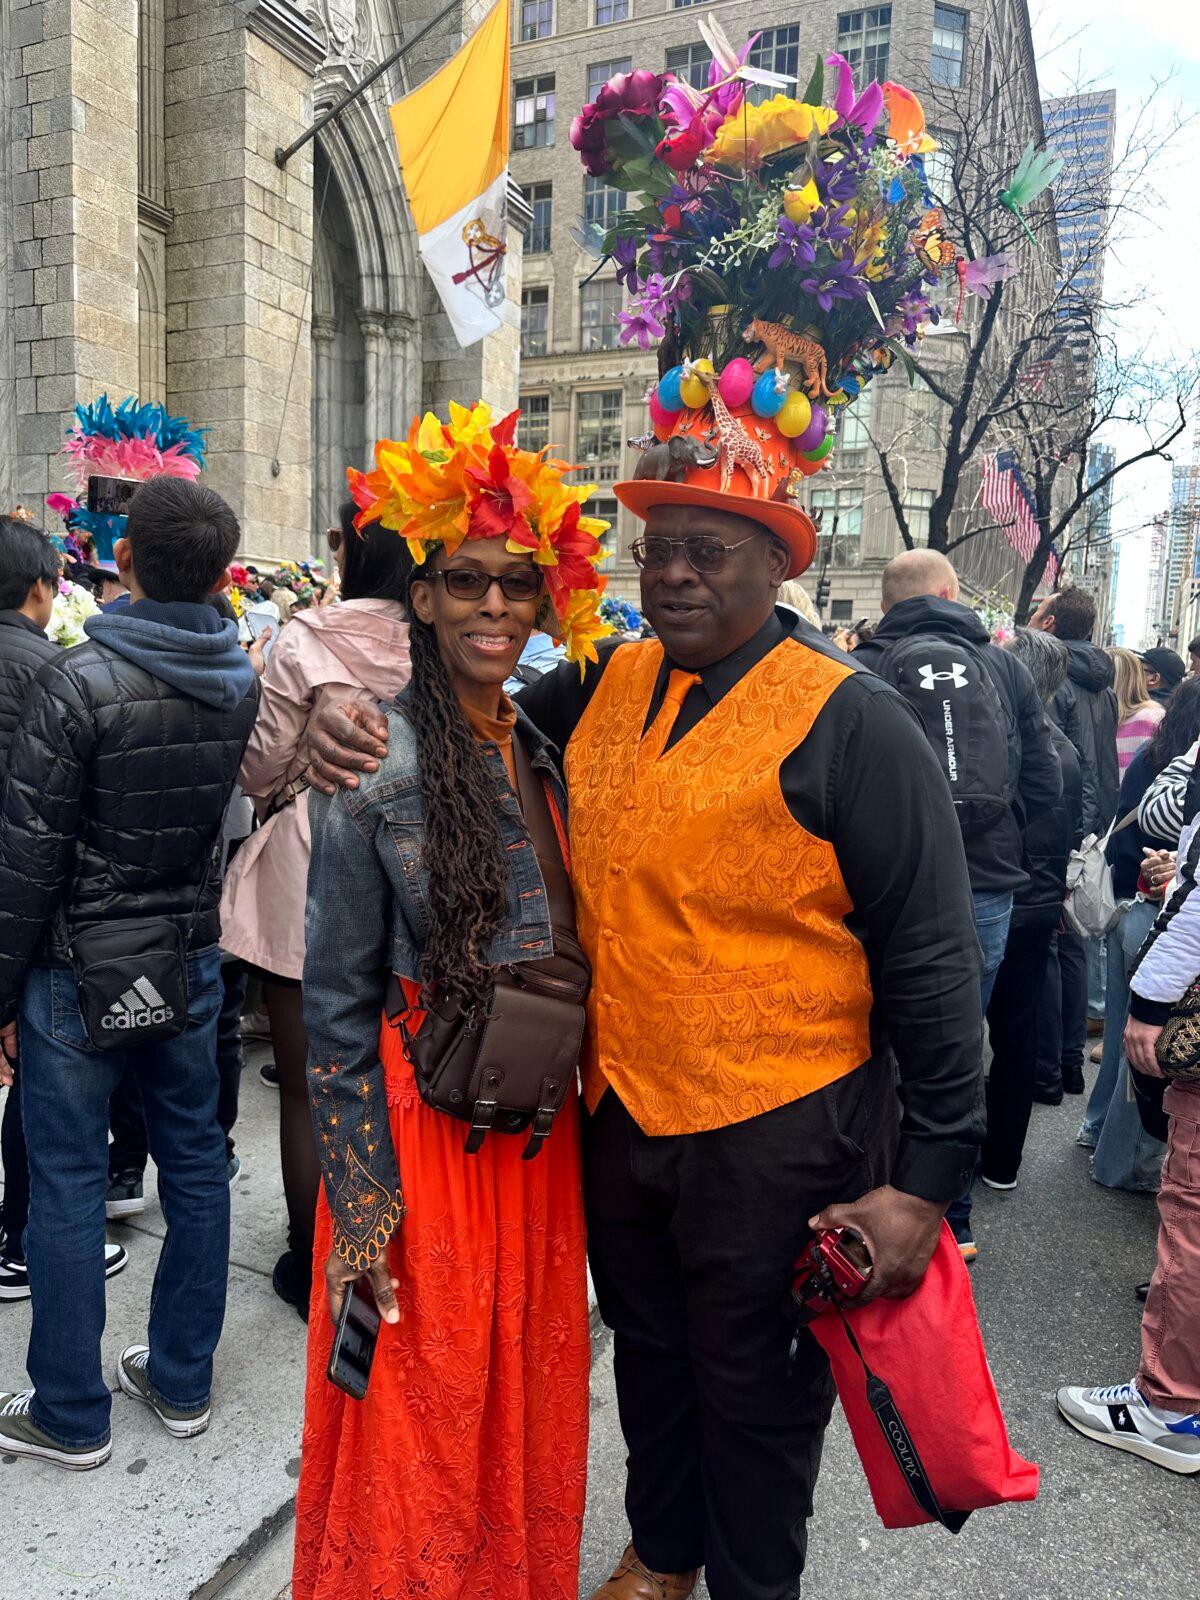 Andrew Sirjue and Nicole Paul attend the NYC Easter Parade on March 31, 2024. (Juliette Fairley/The Epoch Times)